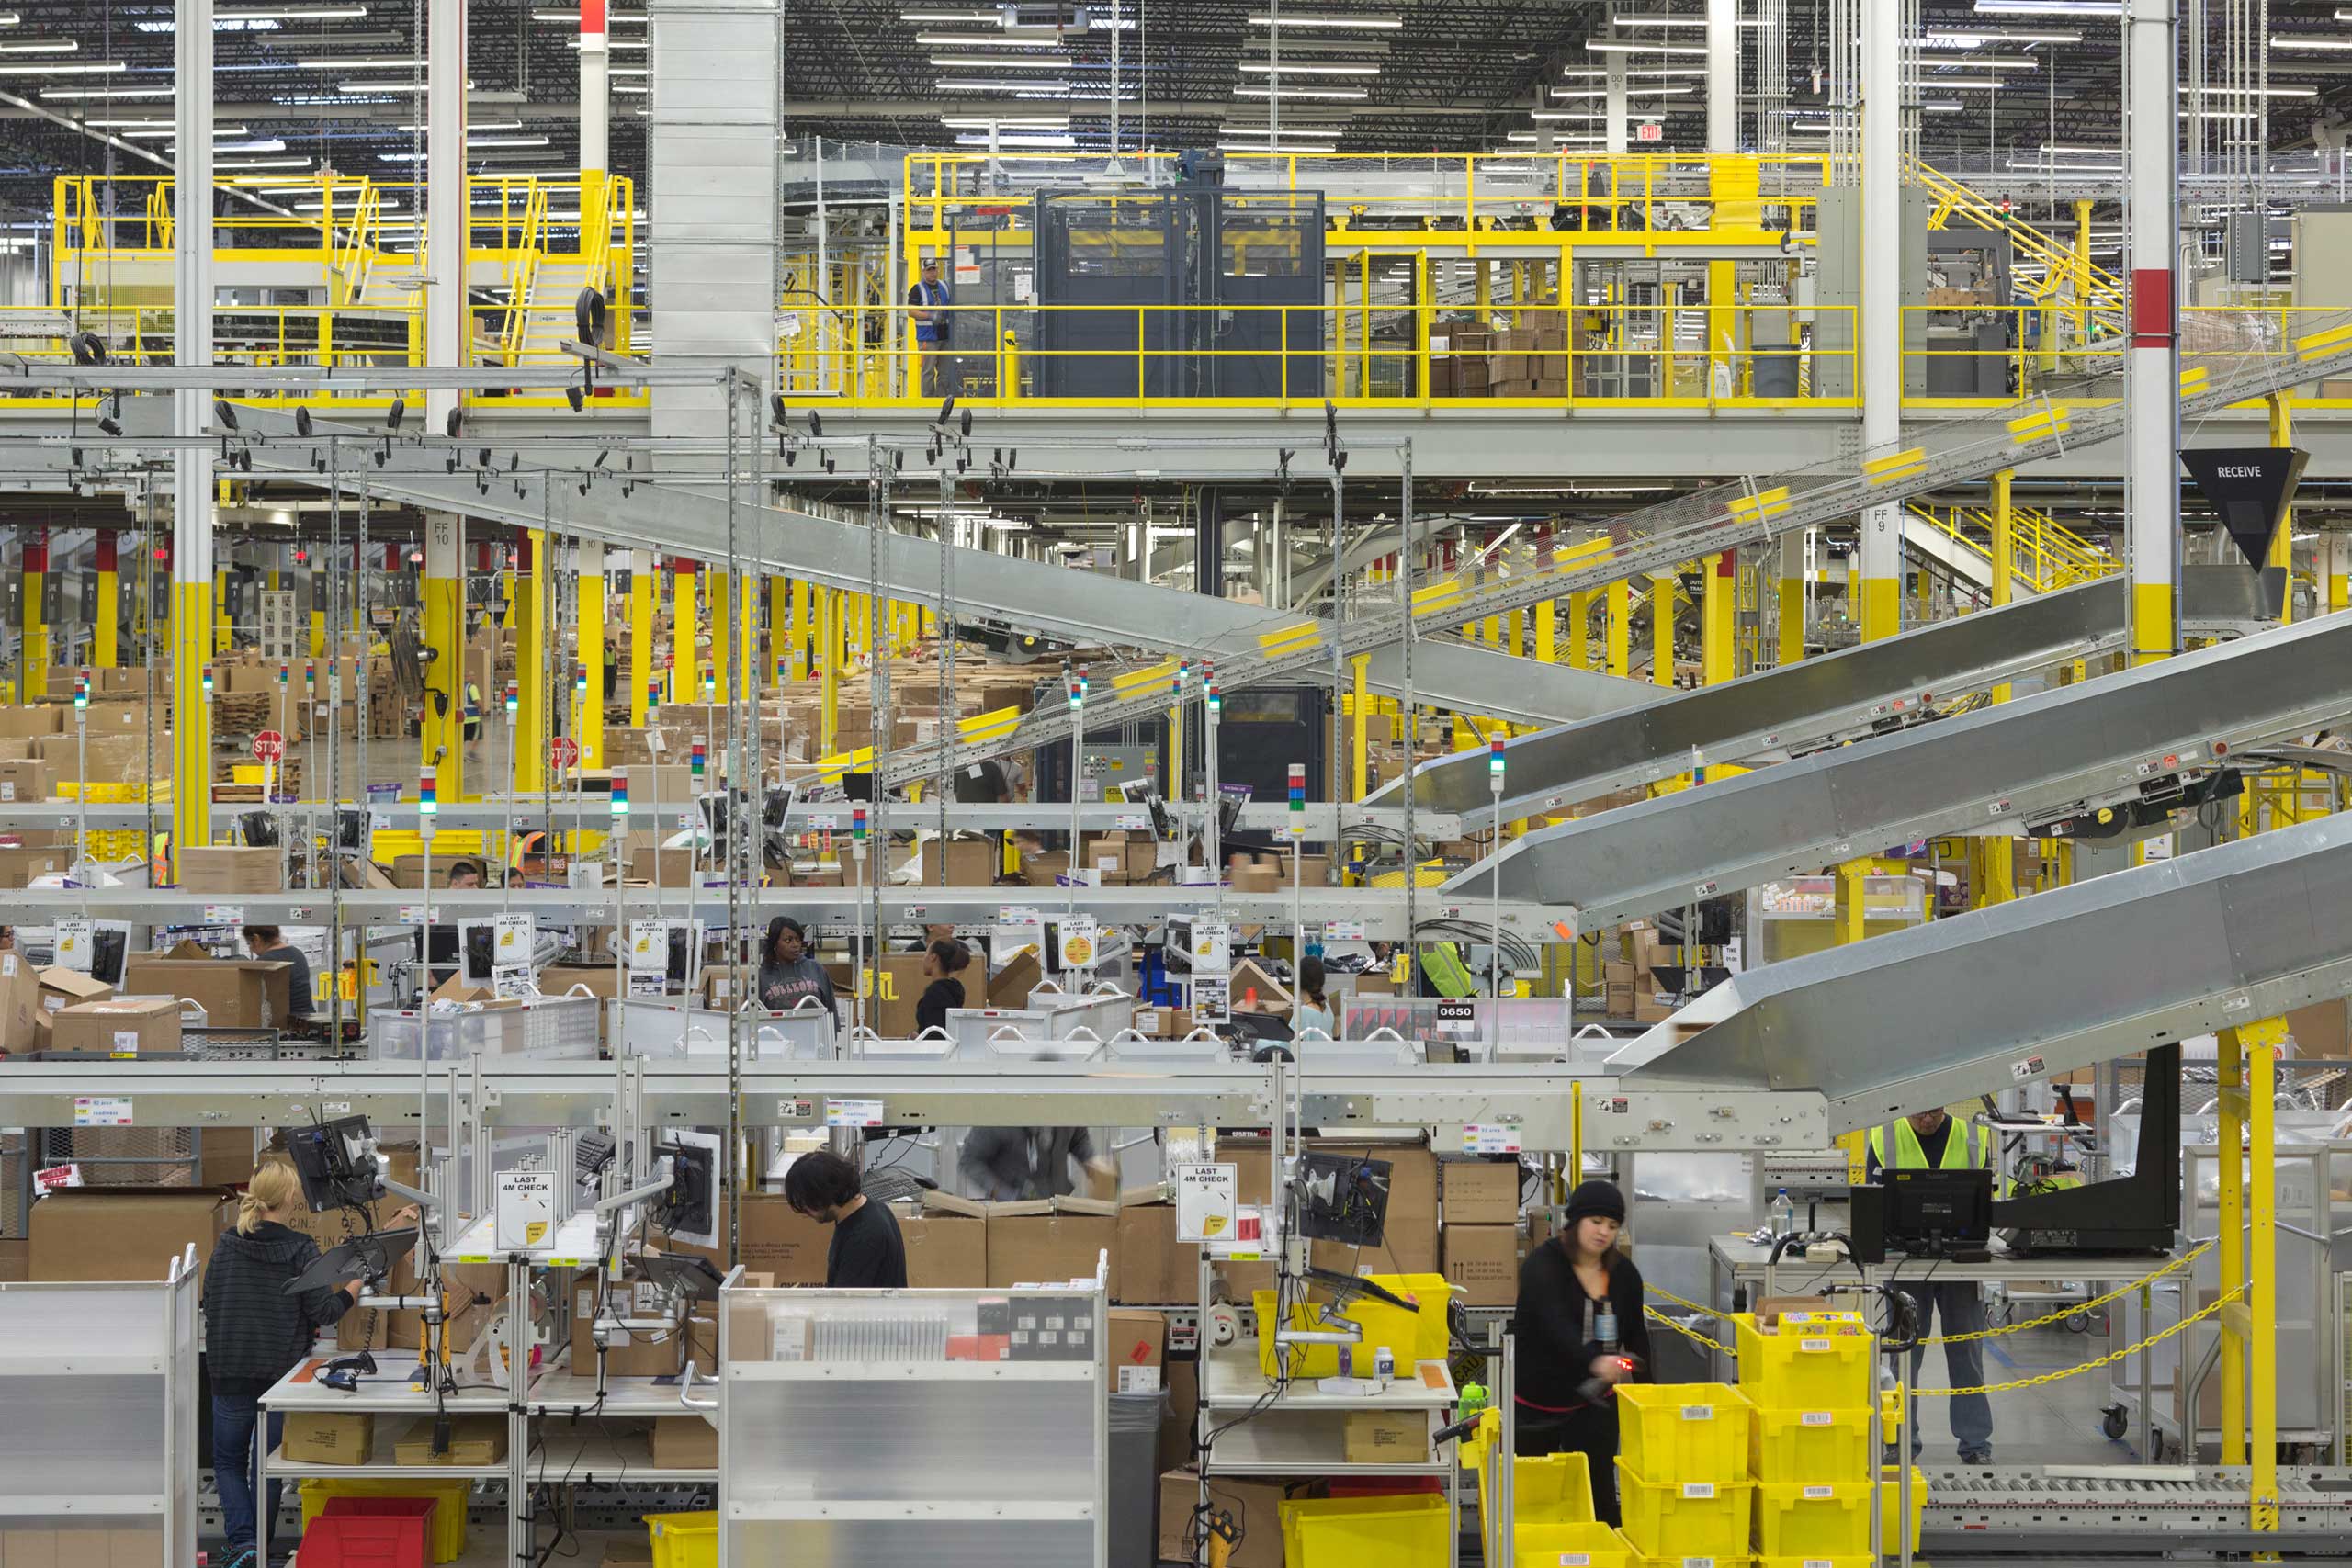 The packaging process at the Amazon fulfillment center in Tracy, Calif. on Nov. 21, 2014. (Stephen Wilkes For TIME)